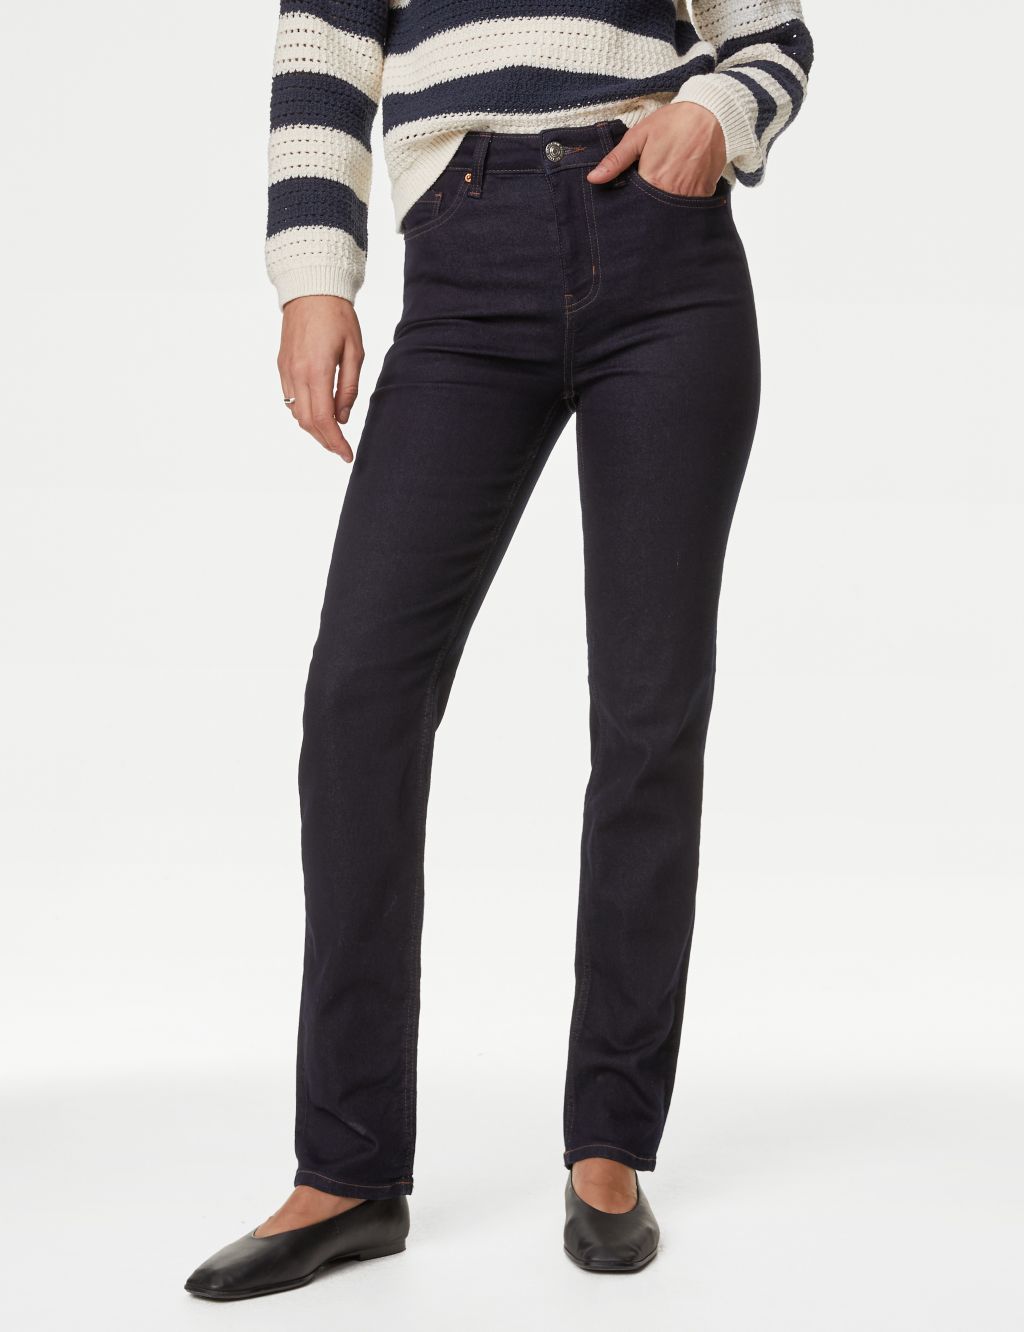 Sienna Straight Leg Jeans with Stretch image 3